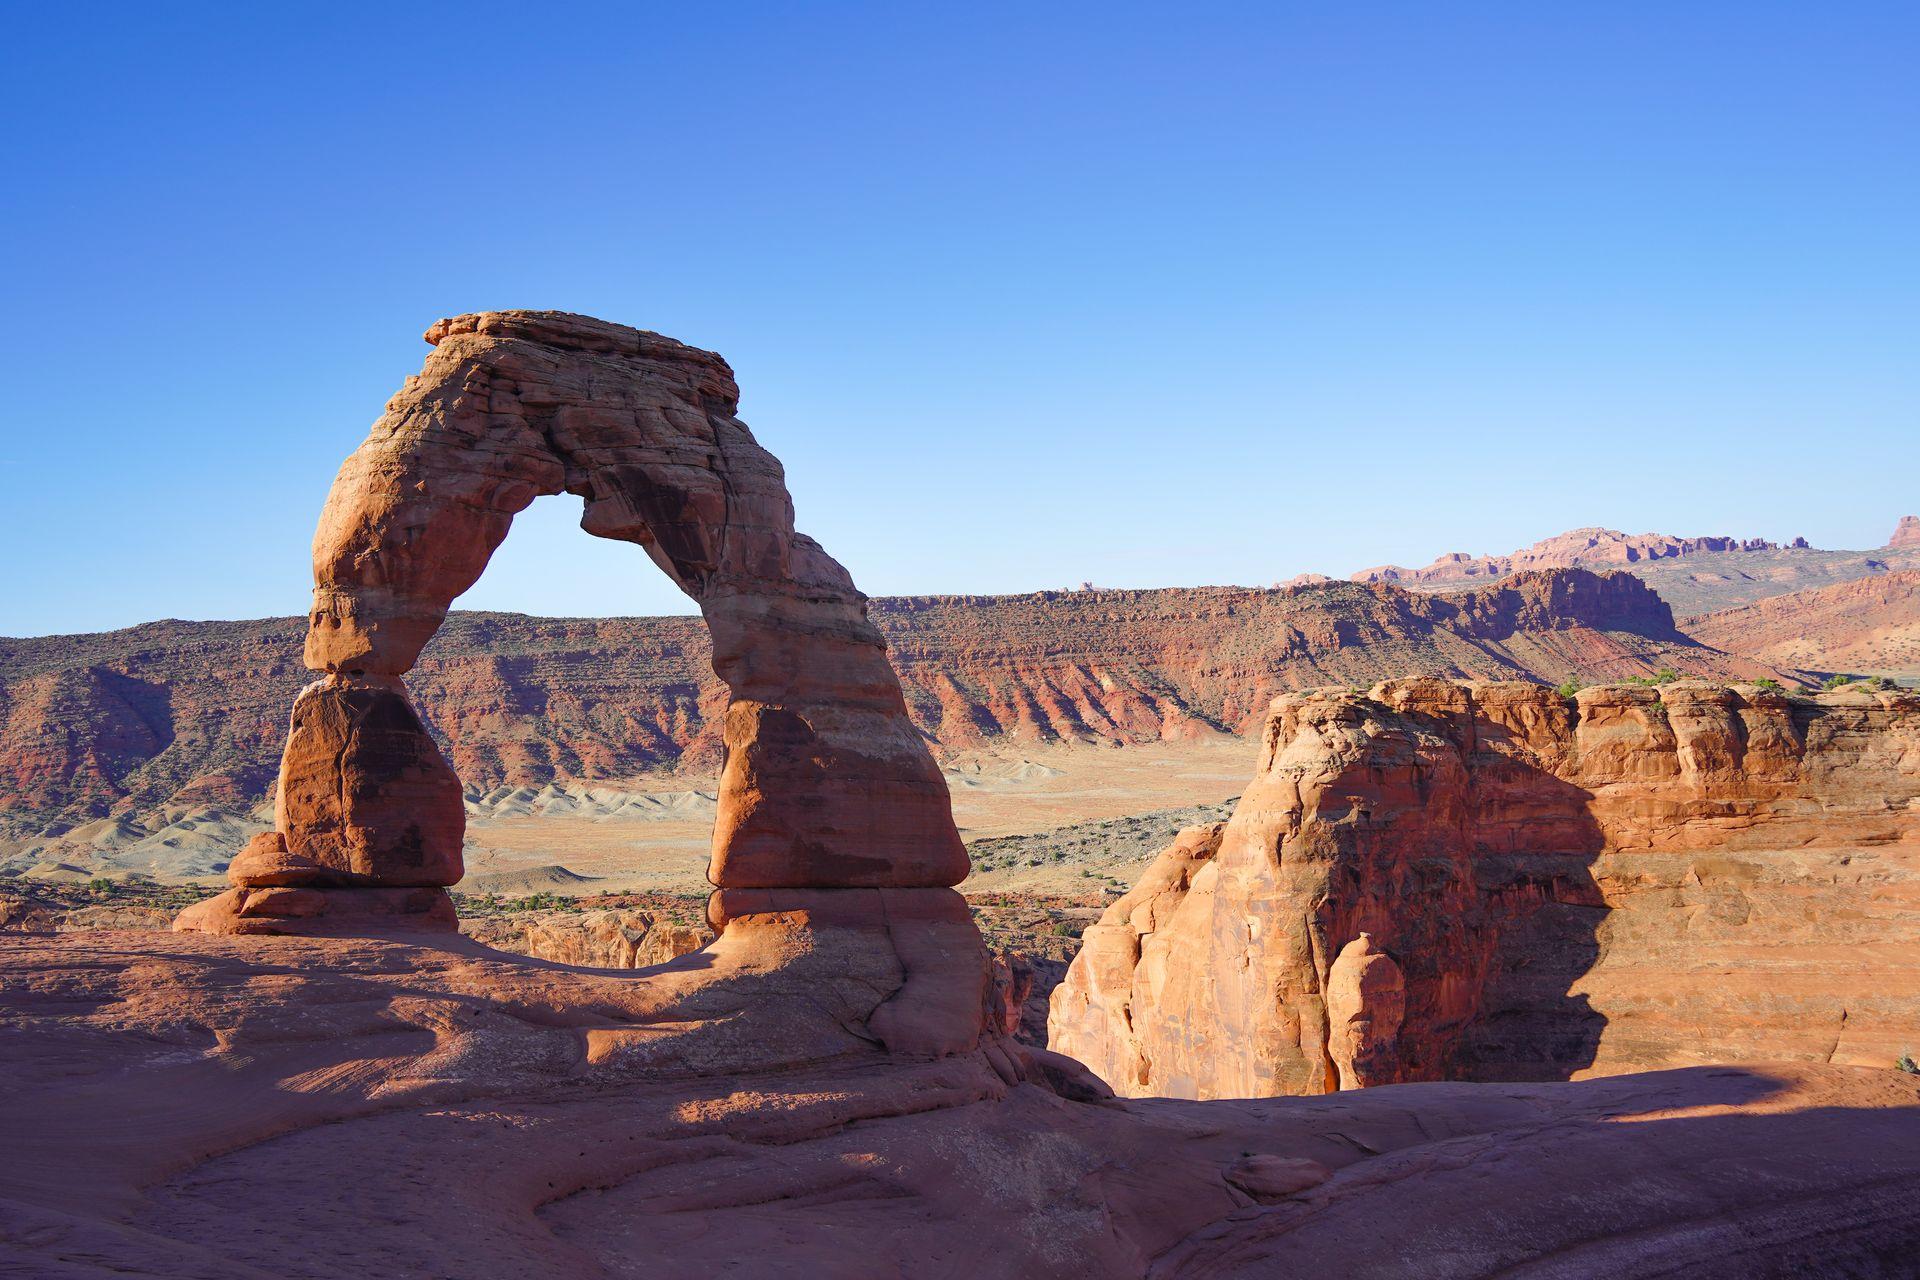 The famous Delicate Arch in Arches National Park. The giant arch stands alone and is framed to the left.